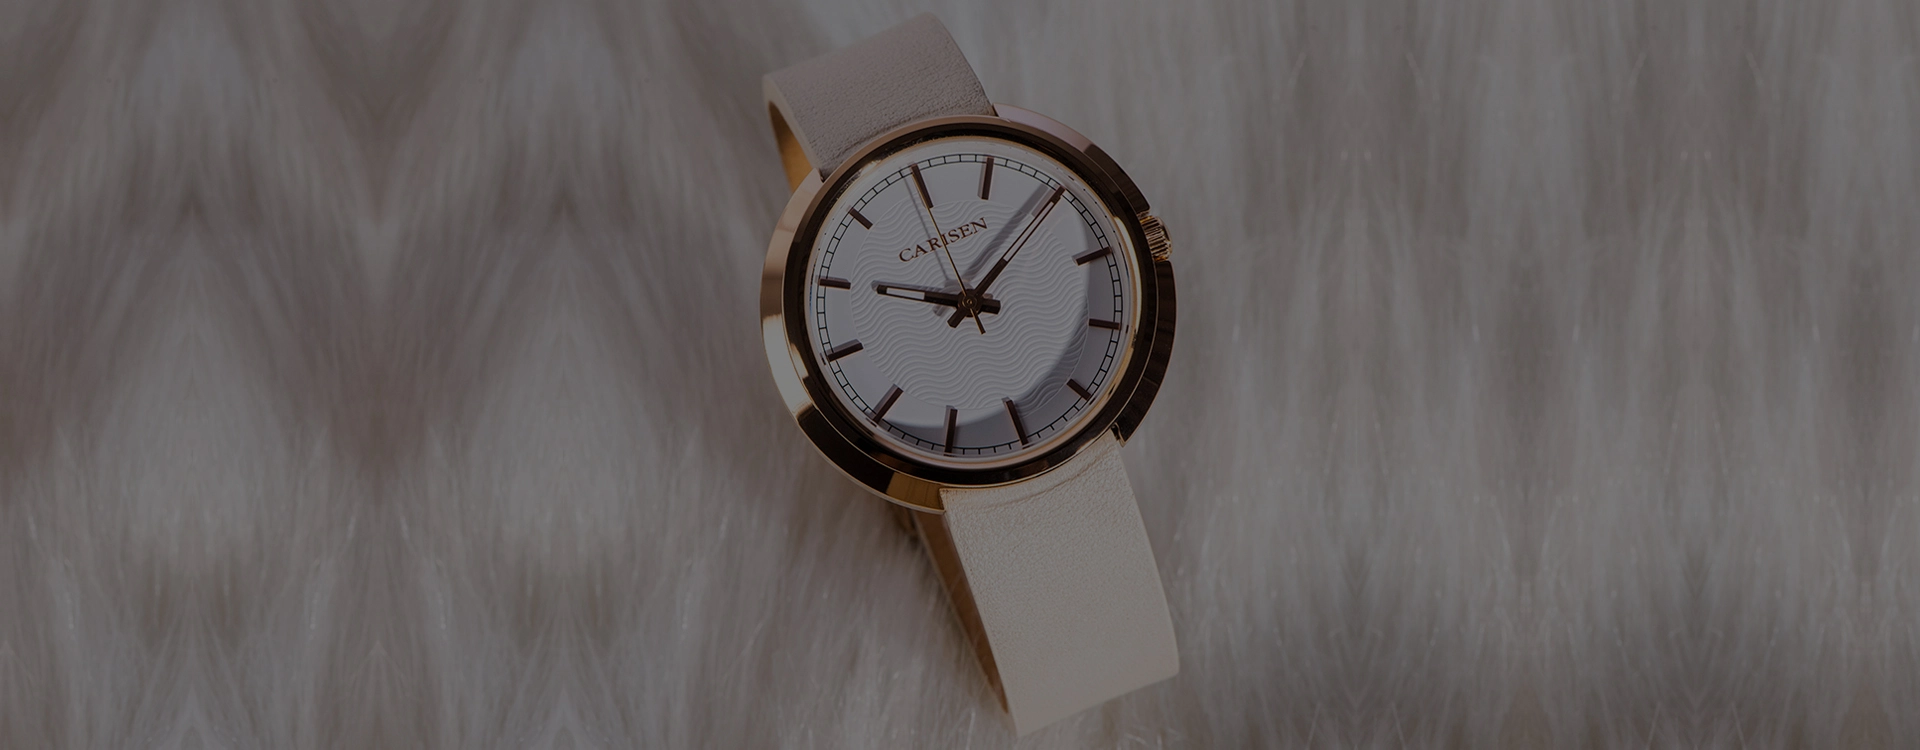 Seagull Movement Watches: High-Quality, Affordable Timepieces